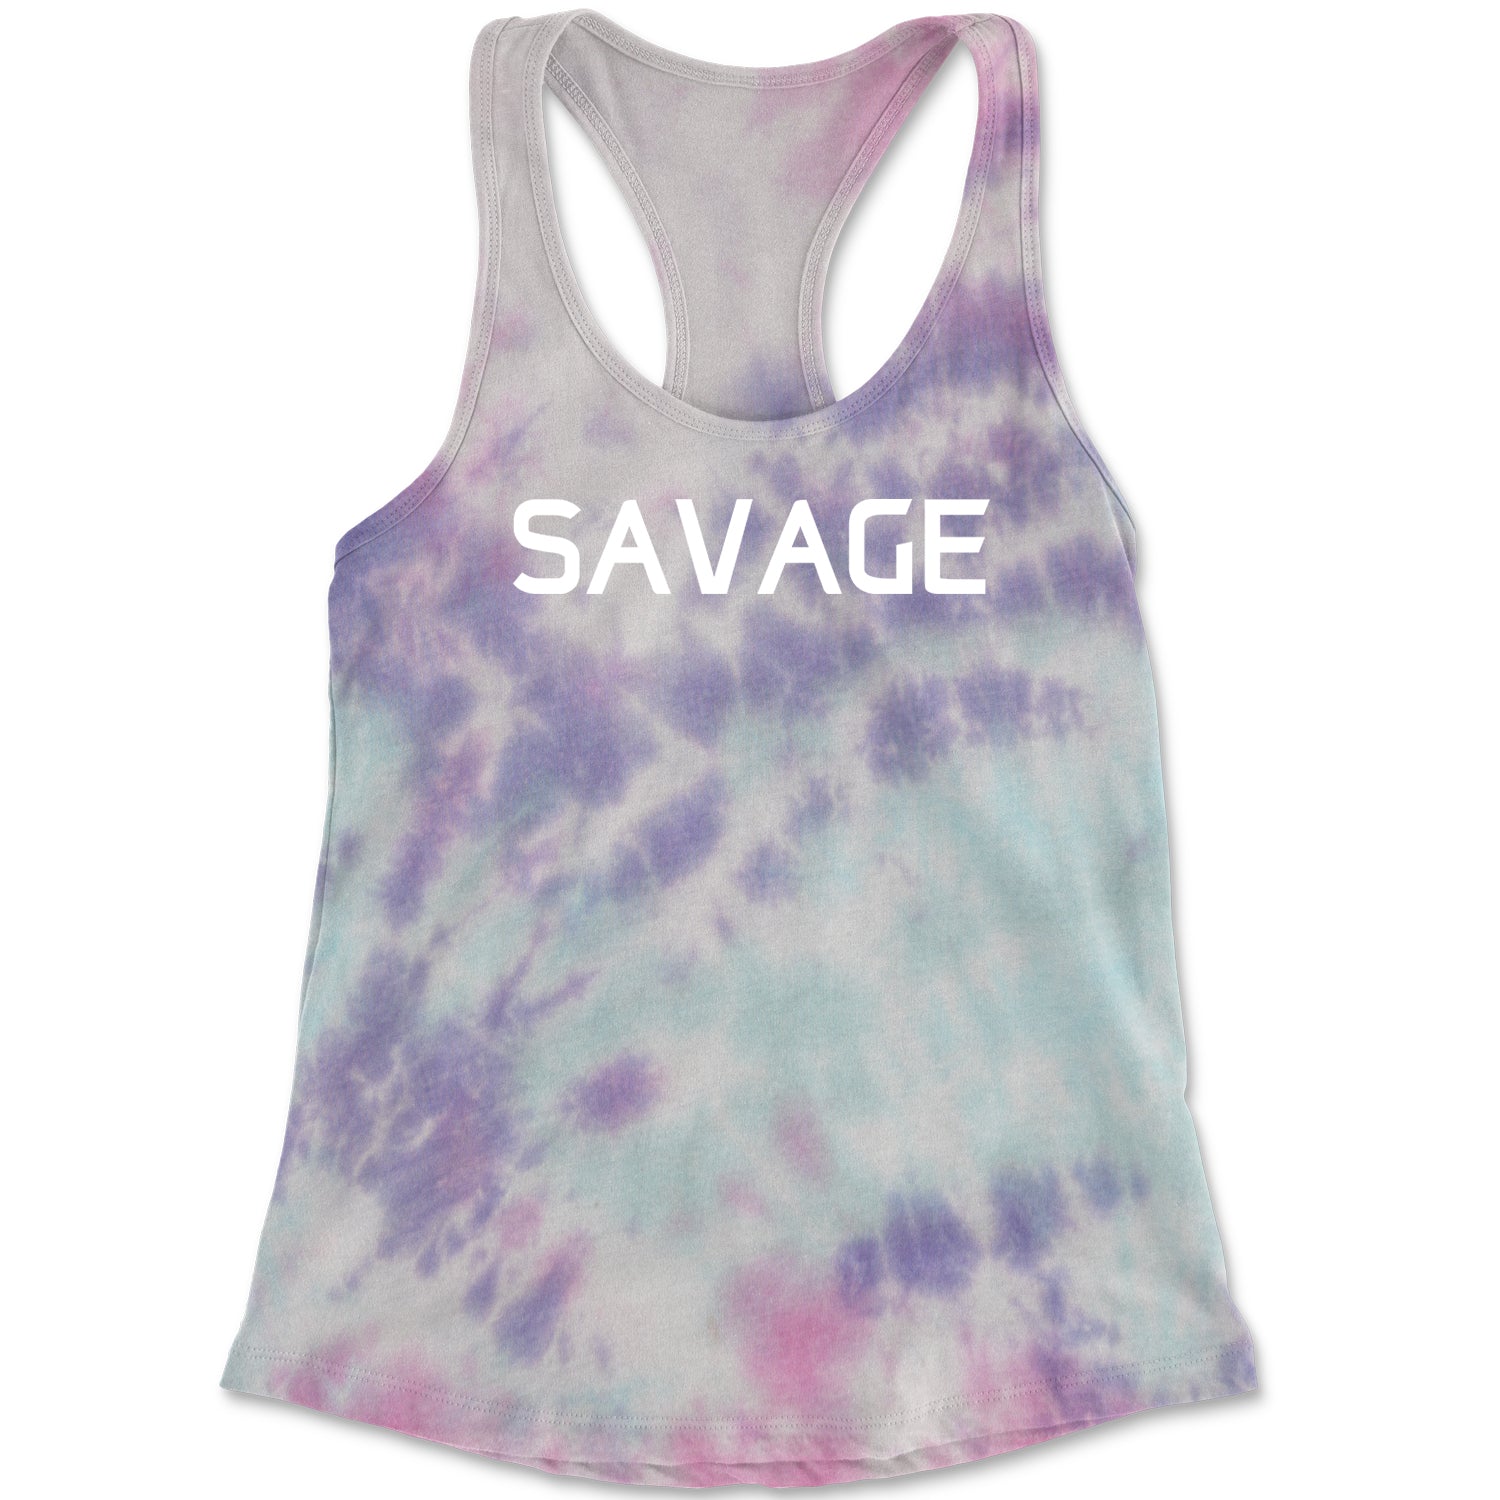 Savage Racerback Tank Top for Women #expressiontees by Expression Tees